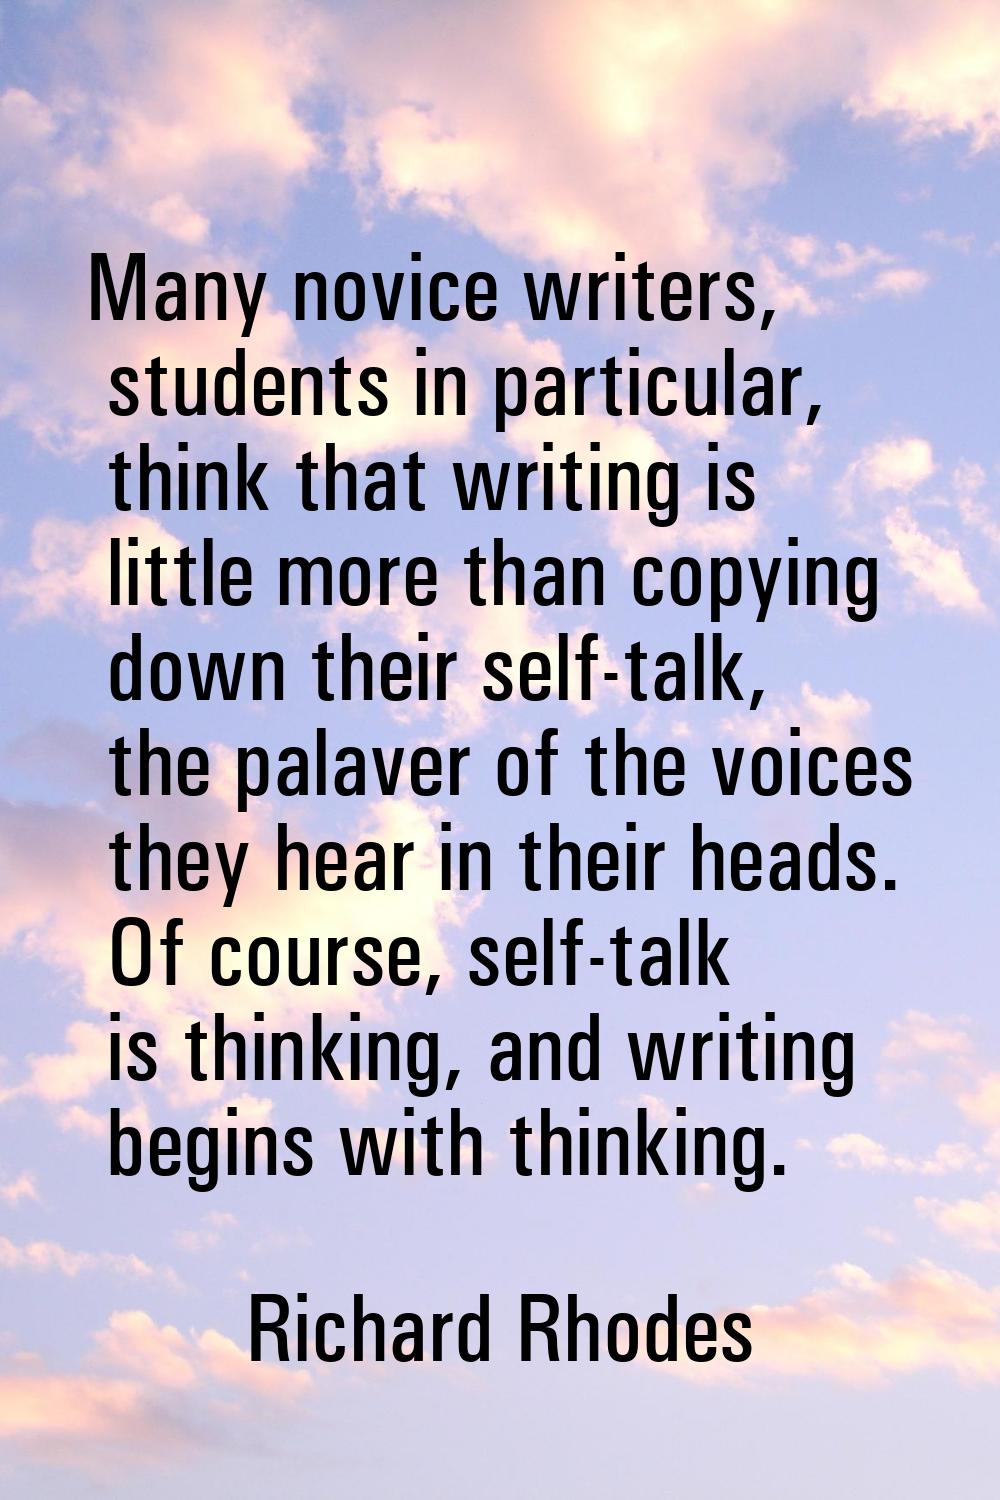 Many novice writers, students in particular, think that writing is little more than copying down th